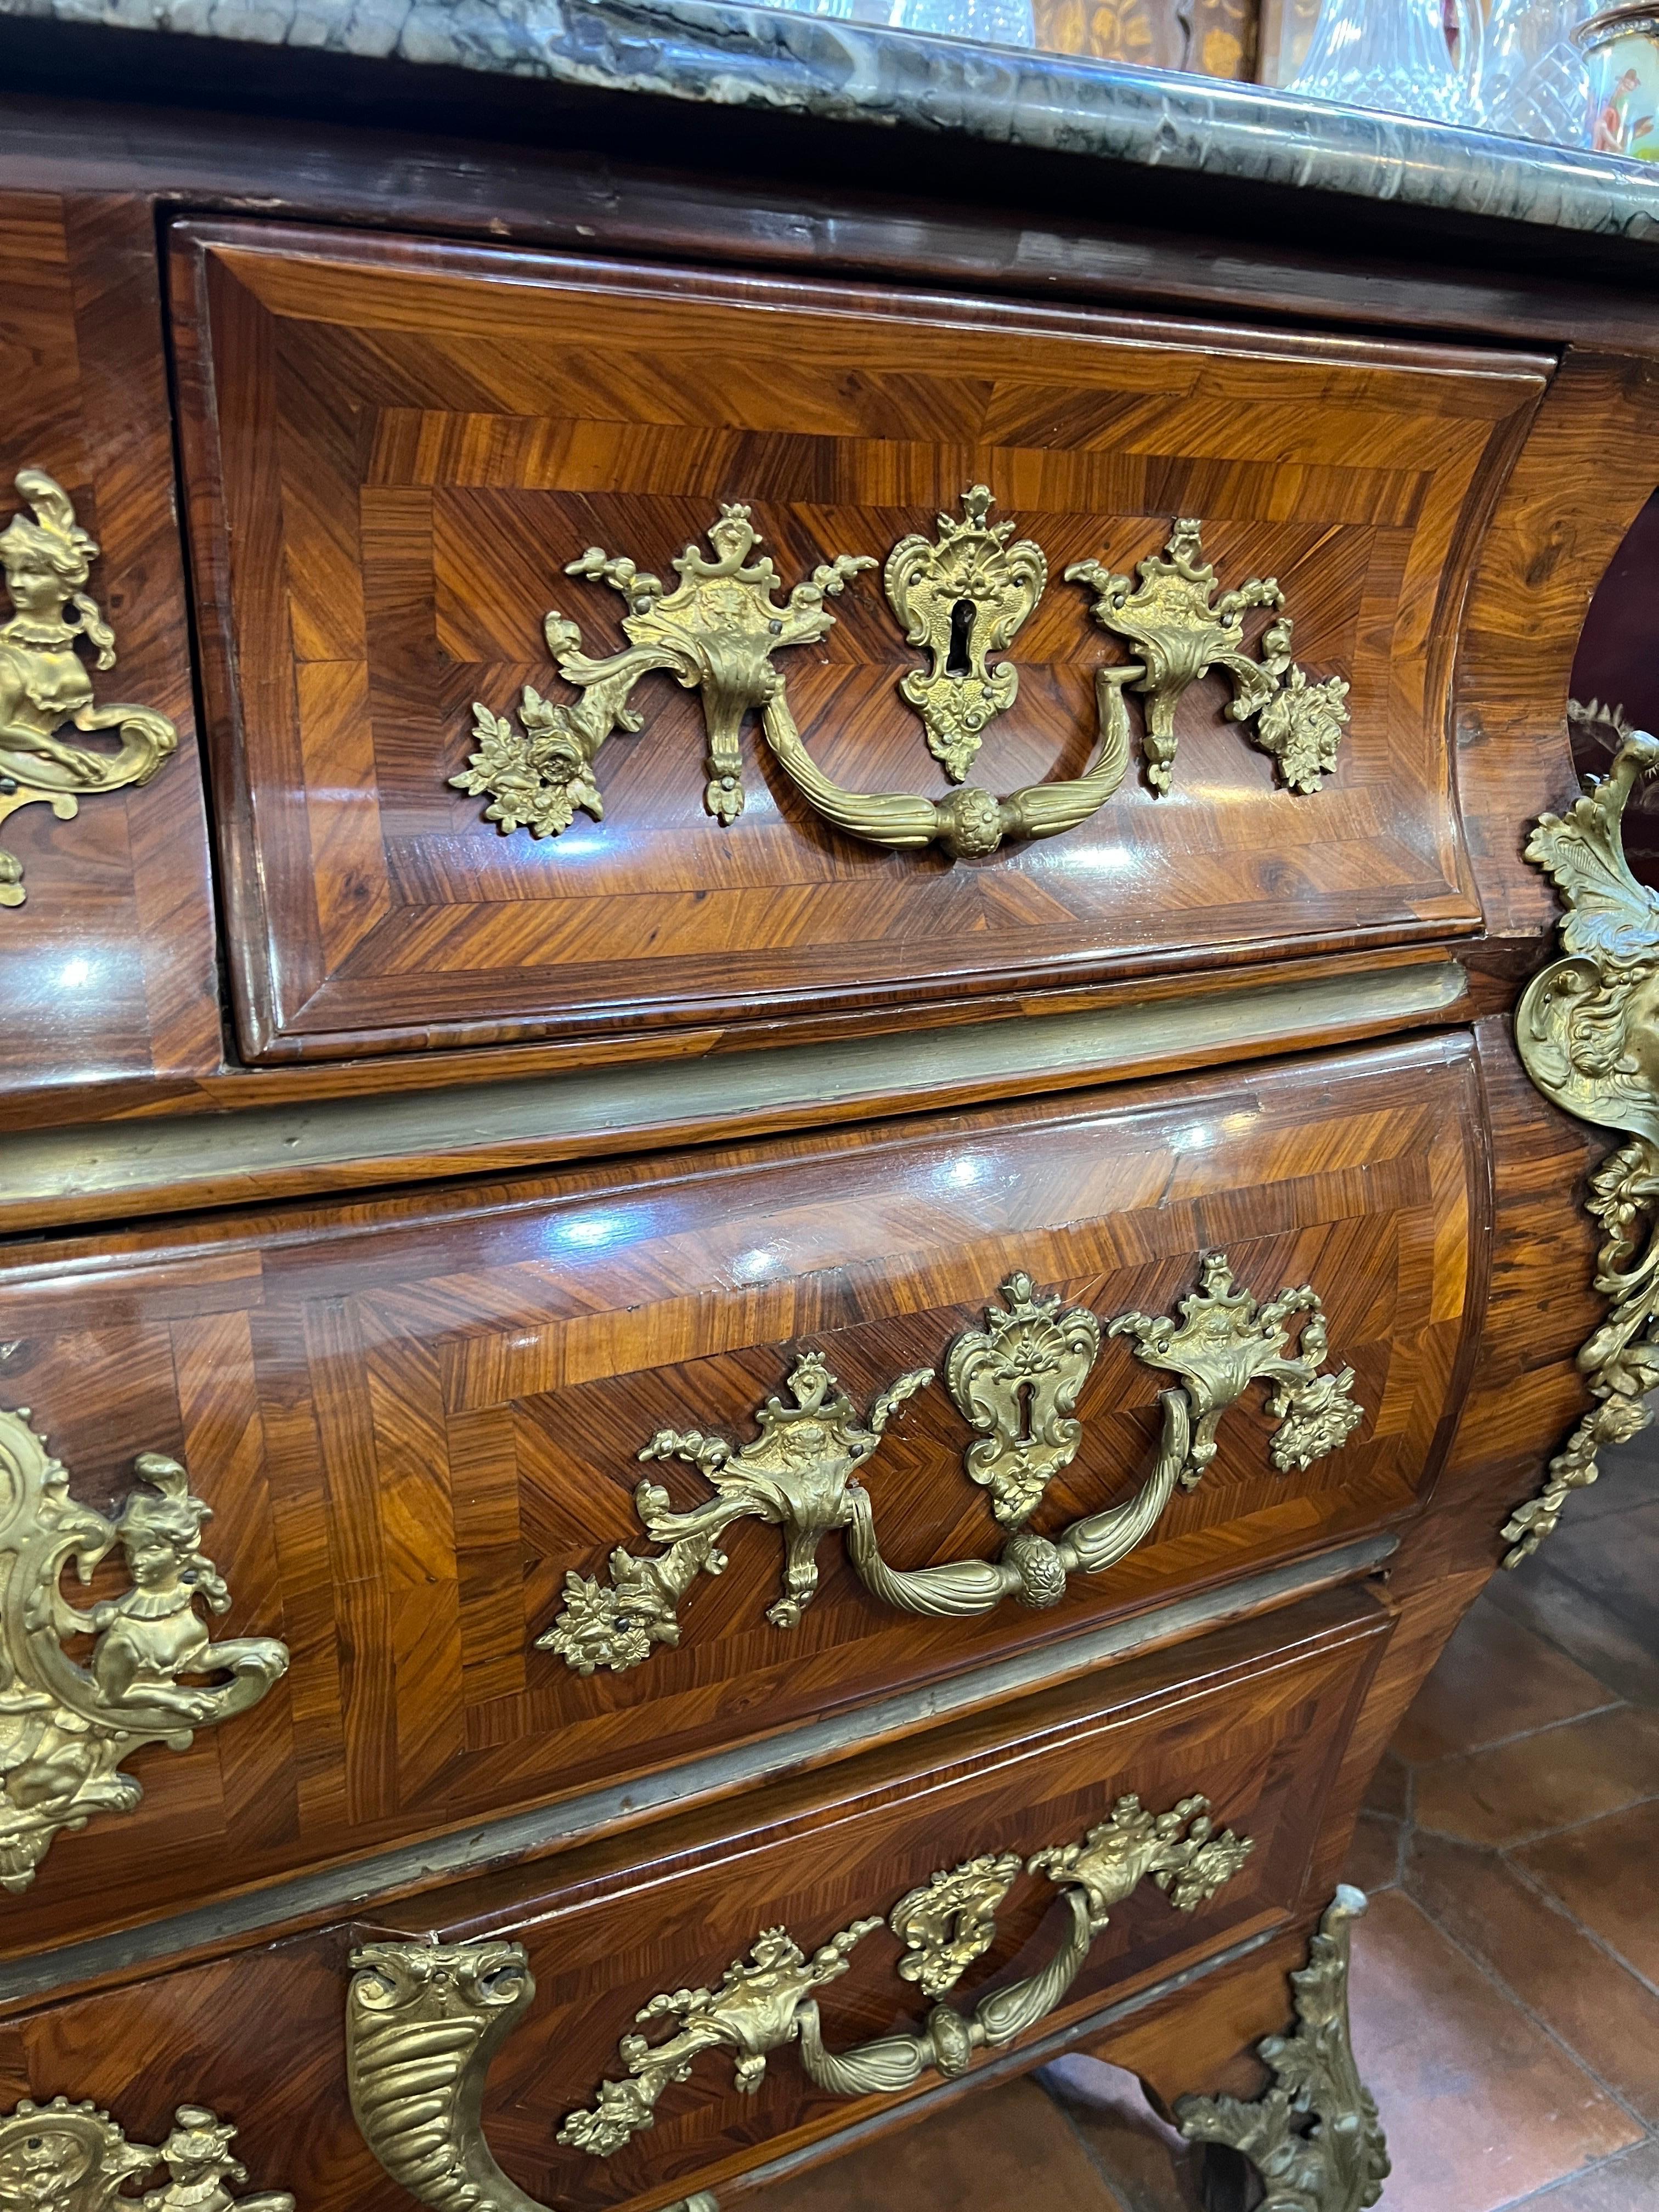 Gilt 18th Century Important Wooden Commode of King Louis XV  by Pierre Migeon 1740 For Sale